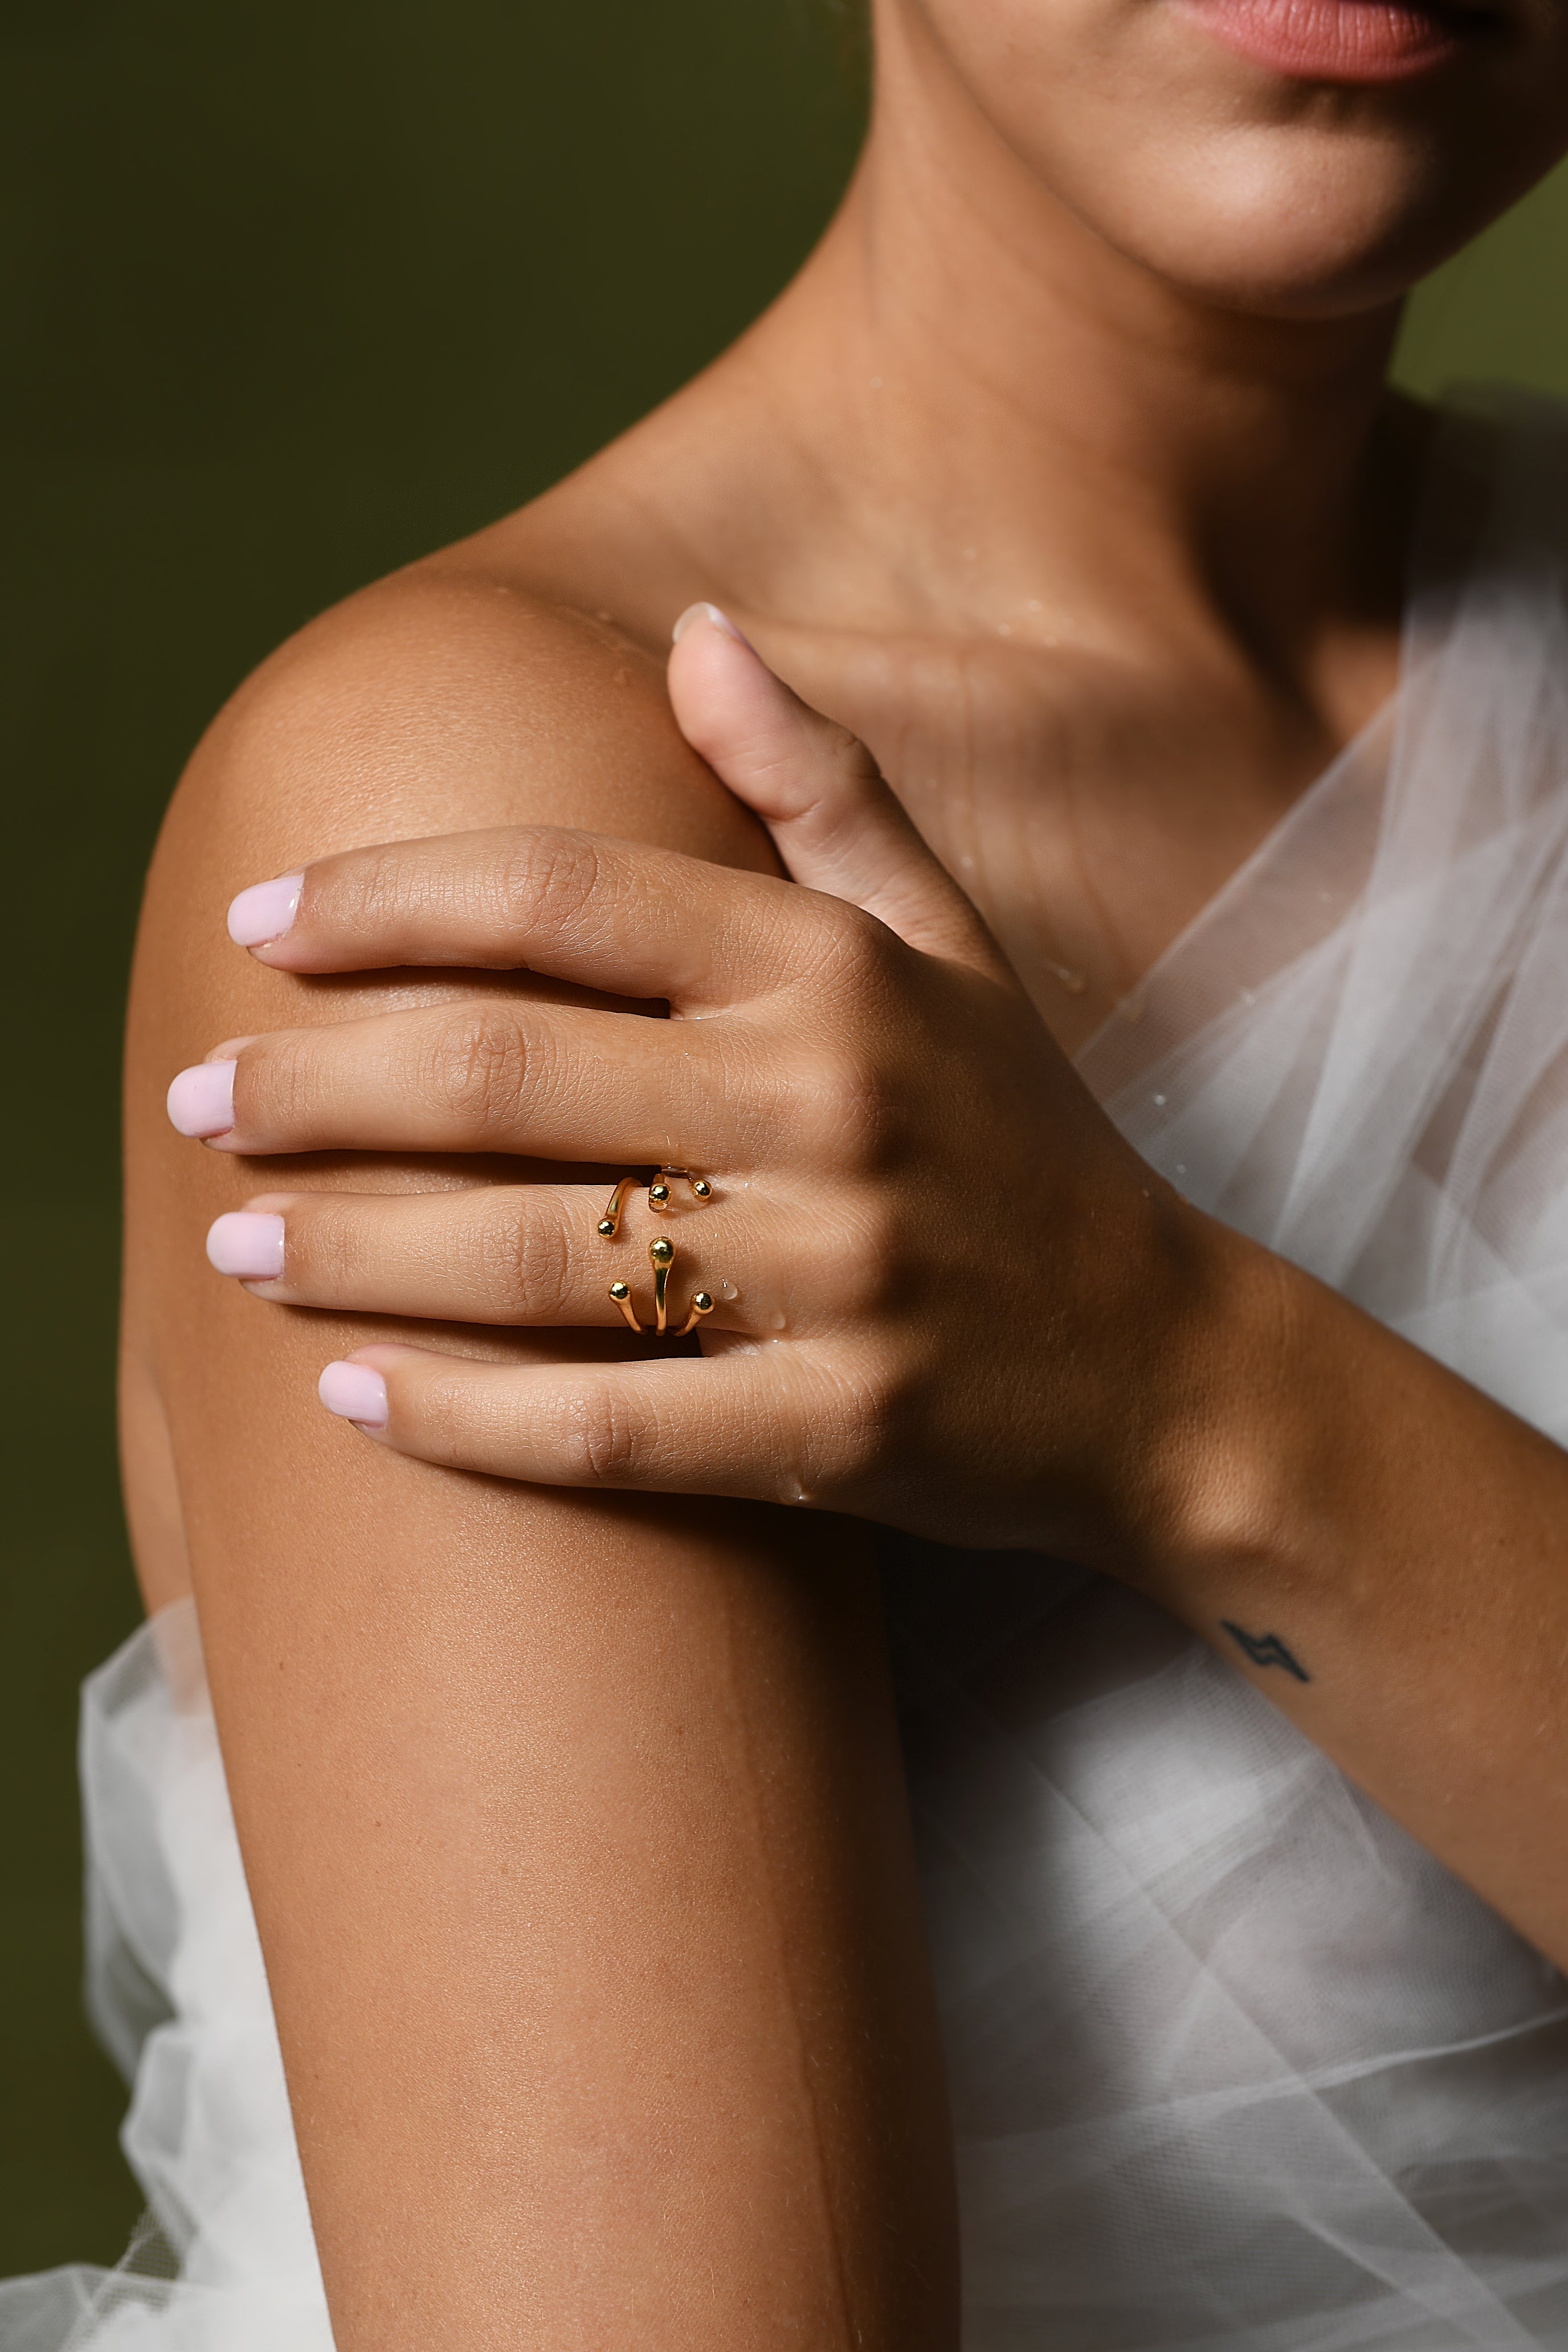 A female model poses with her hand on her shoulder, showing the open band gold ring she is wearing.